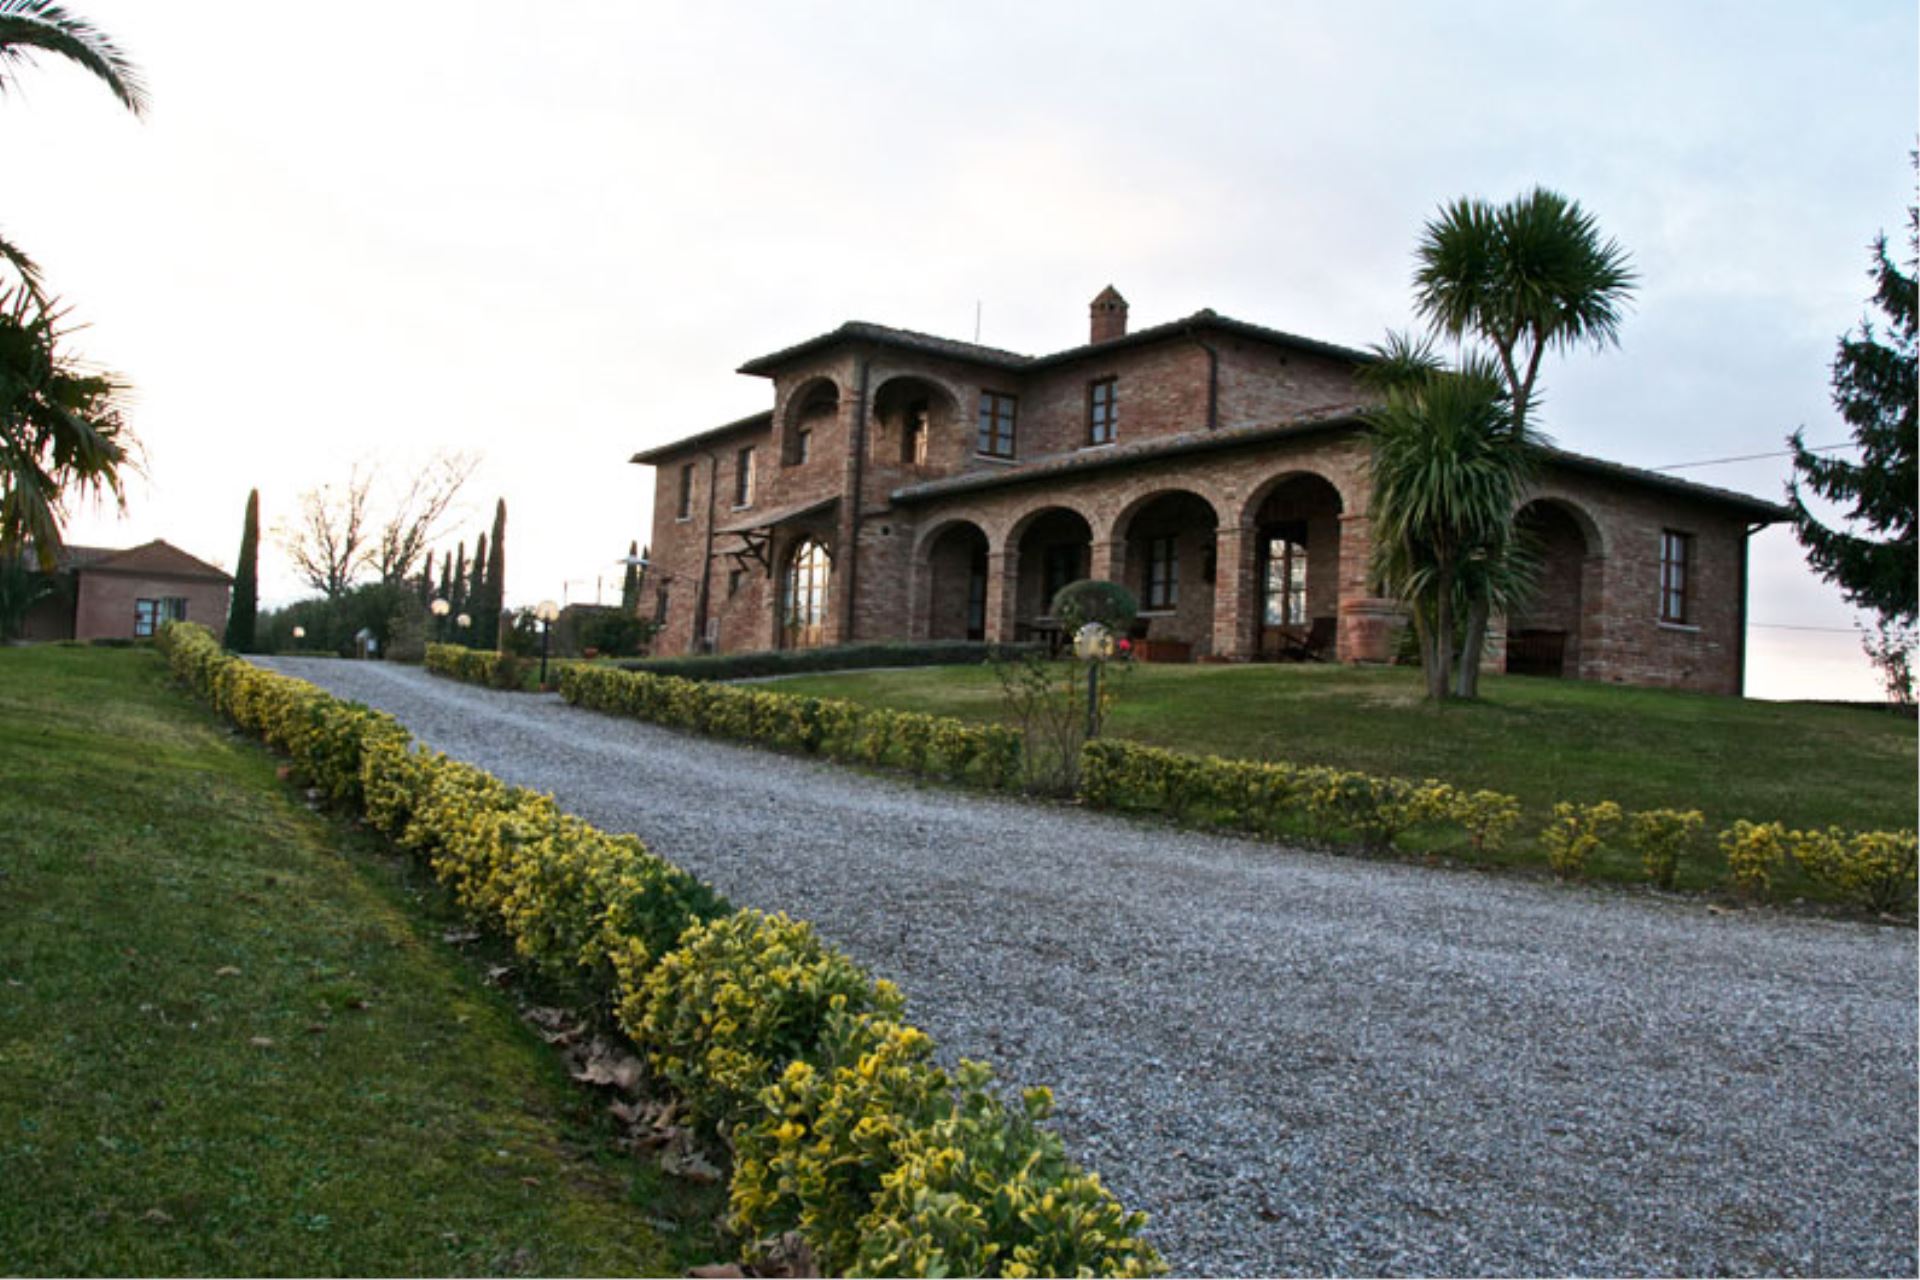 APARTMENTS WITH POOL DOLCE DORMIRE MONTEPULCIANO TOSCANA